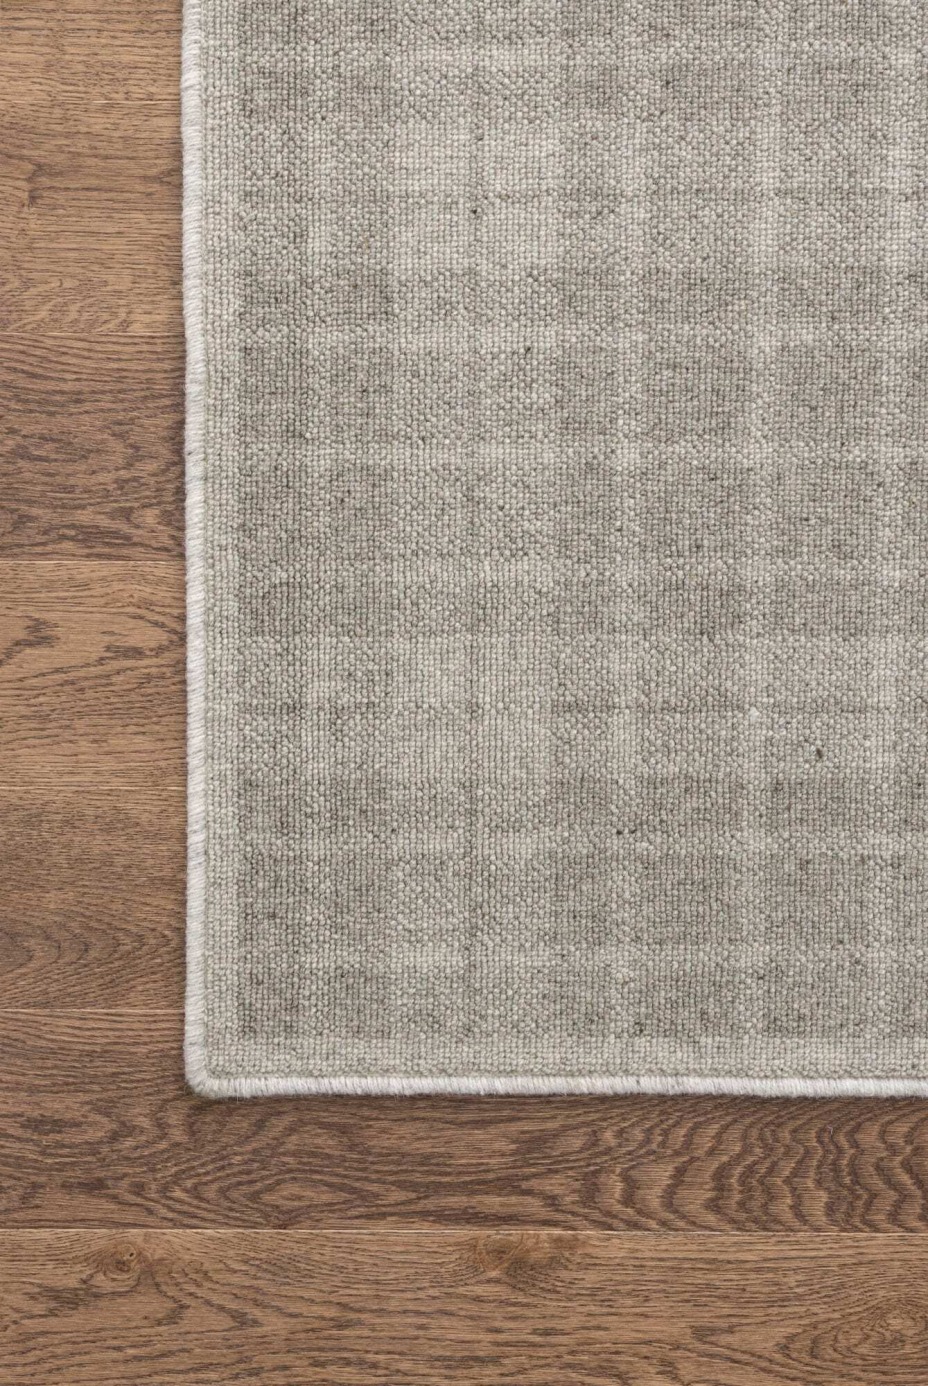 Pano Light Grey rug by Agnella